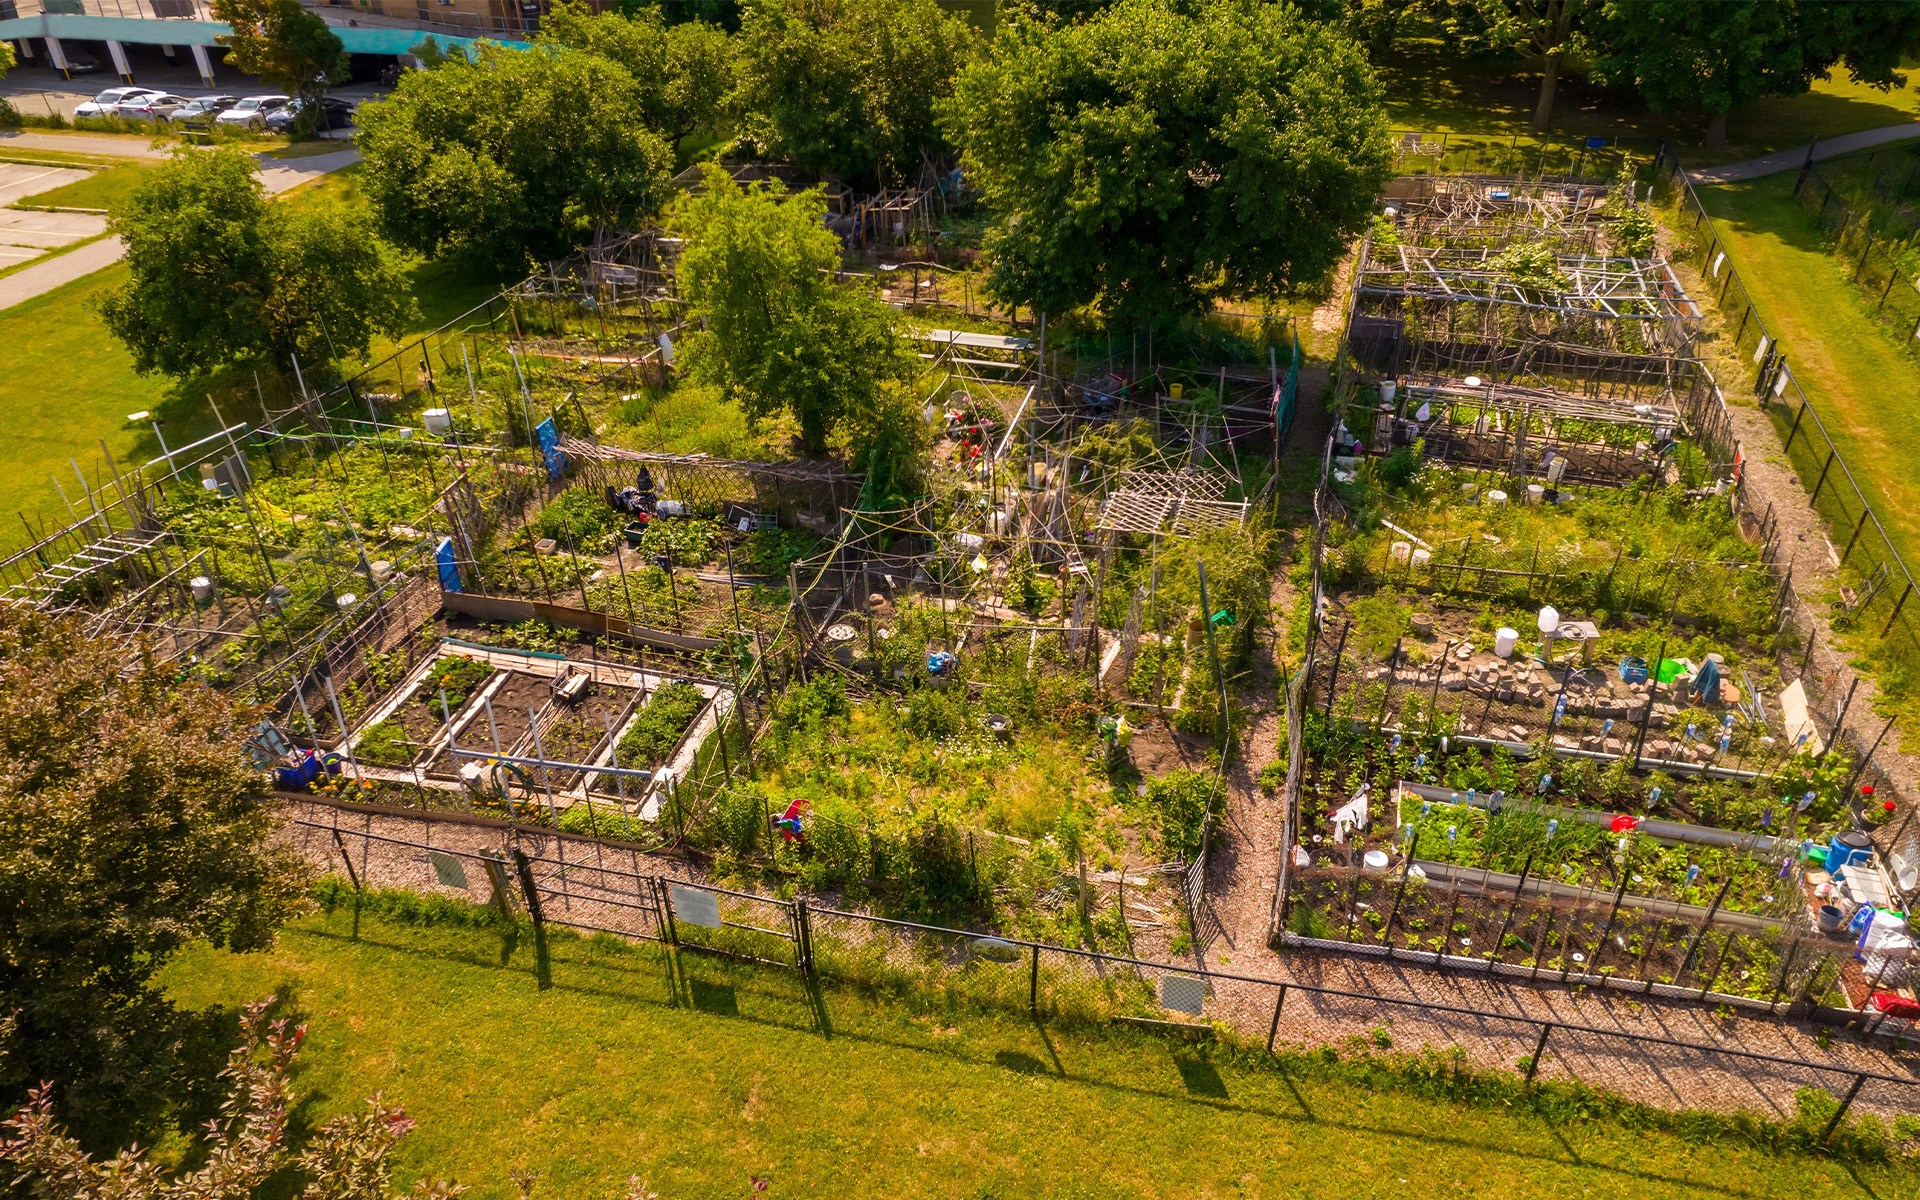 Aerial photo of Canadian community garden